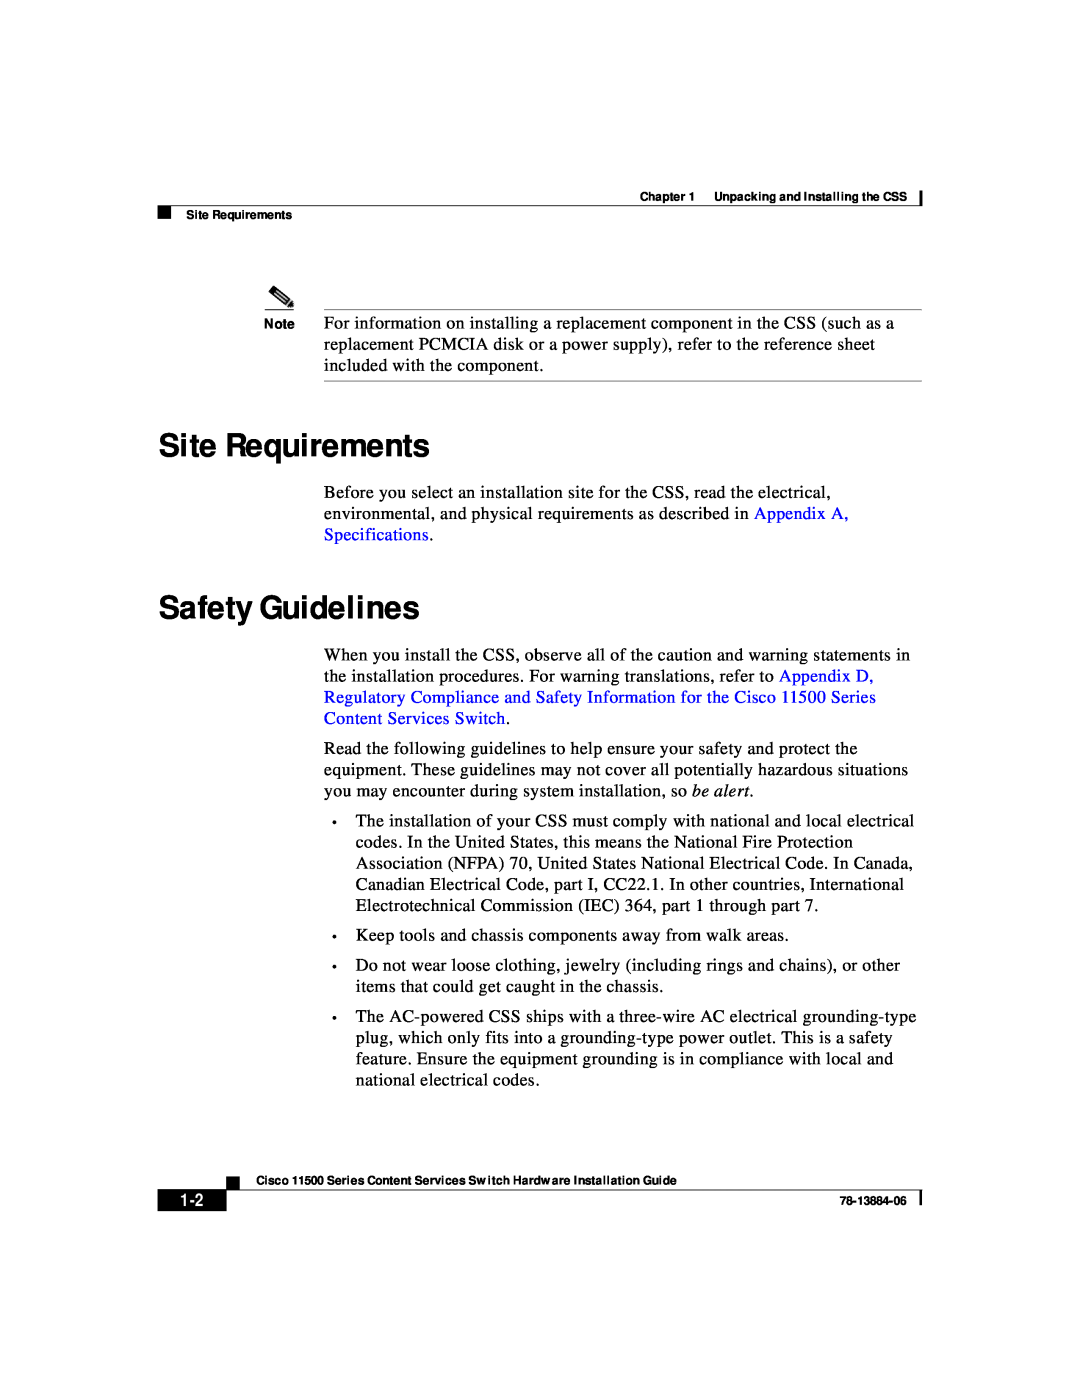 Cisco Systems 11500 Series manual Site Requirements, Safety Guidelines 